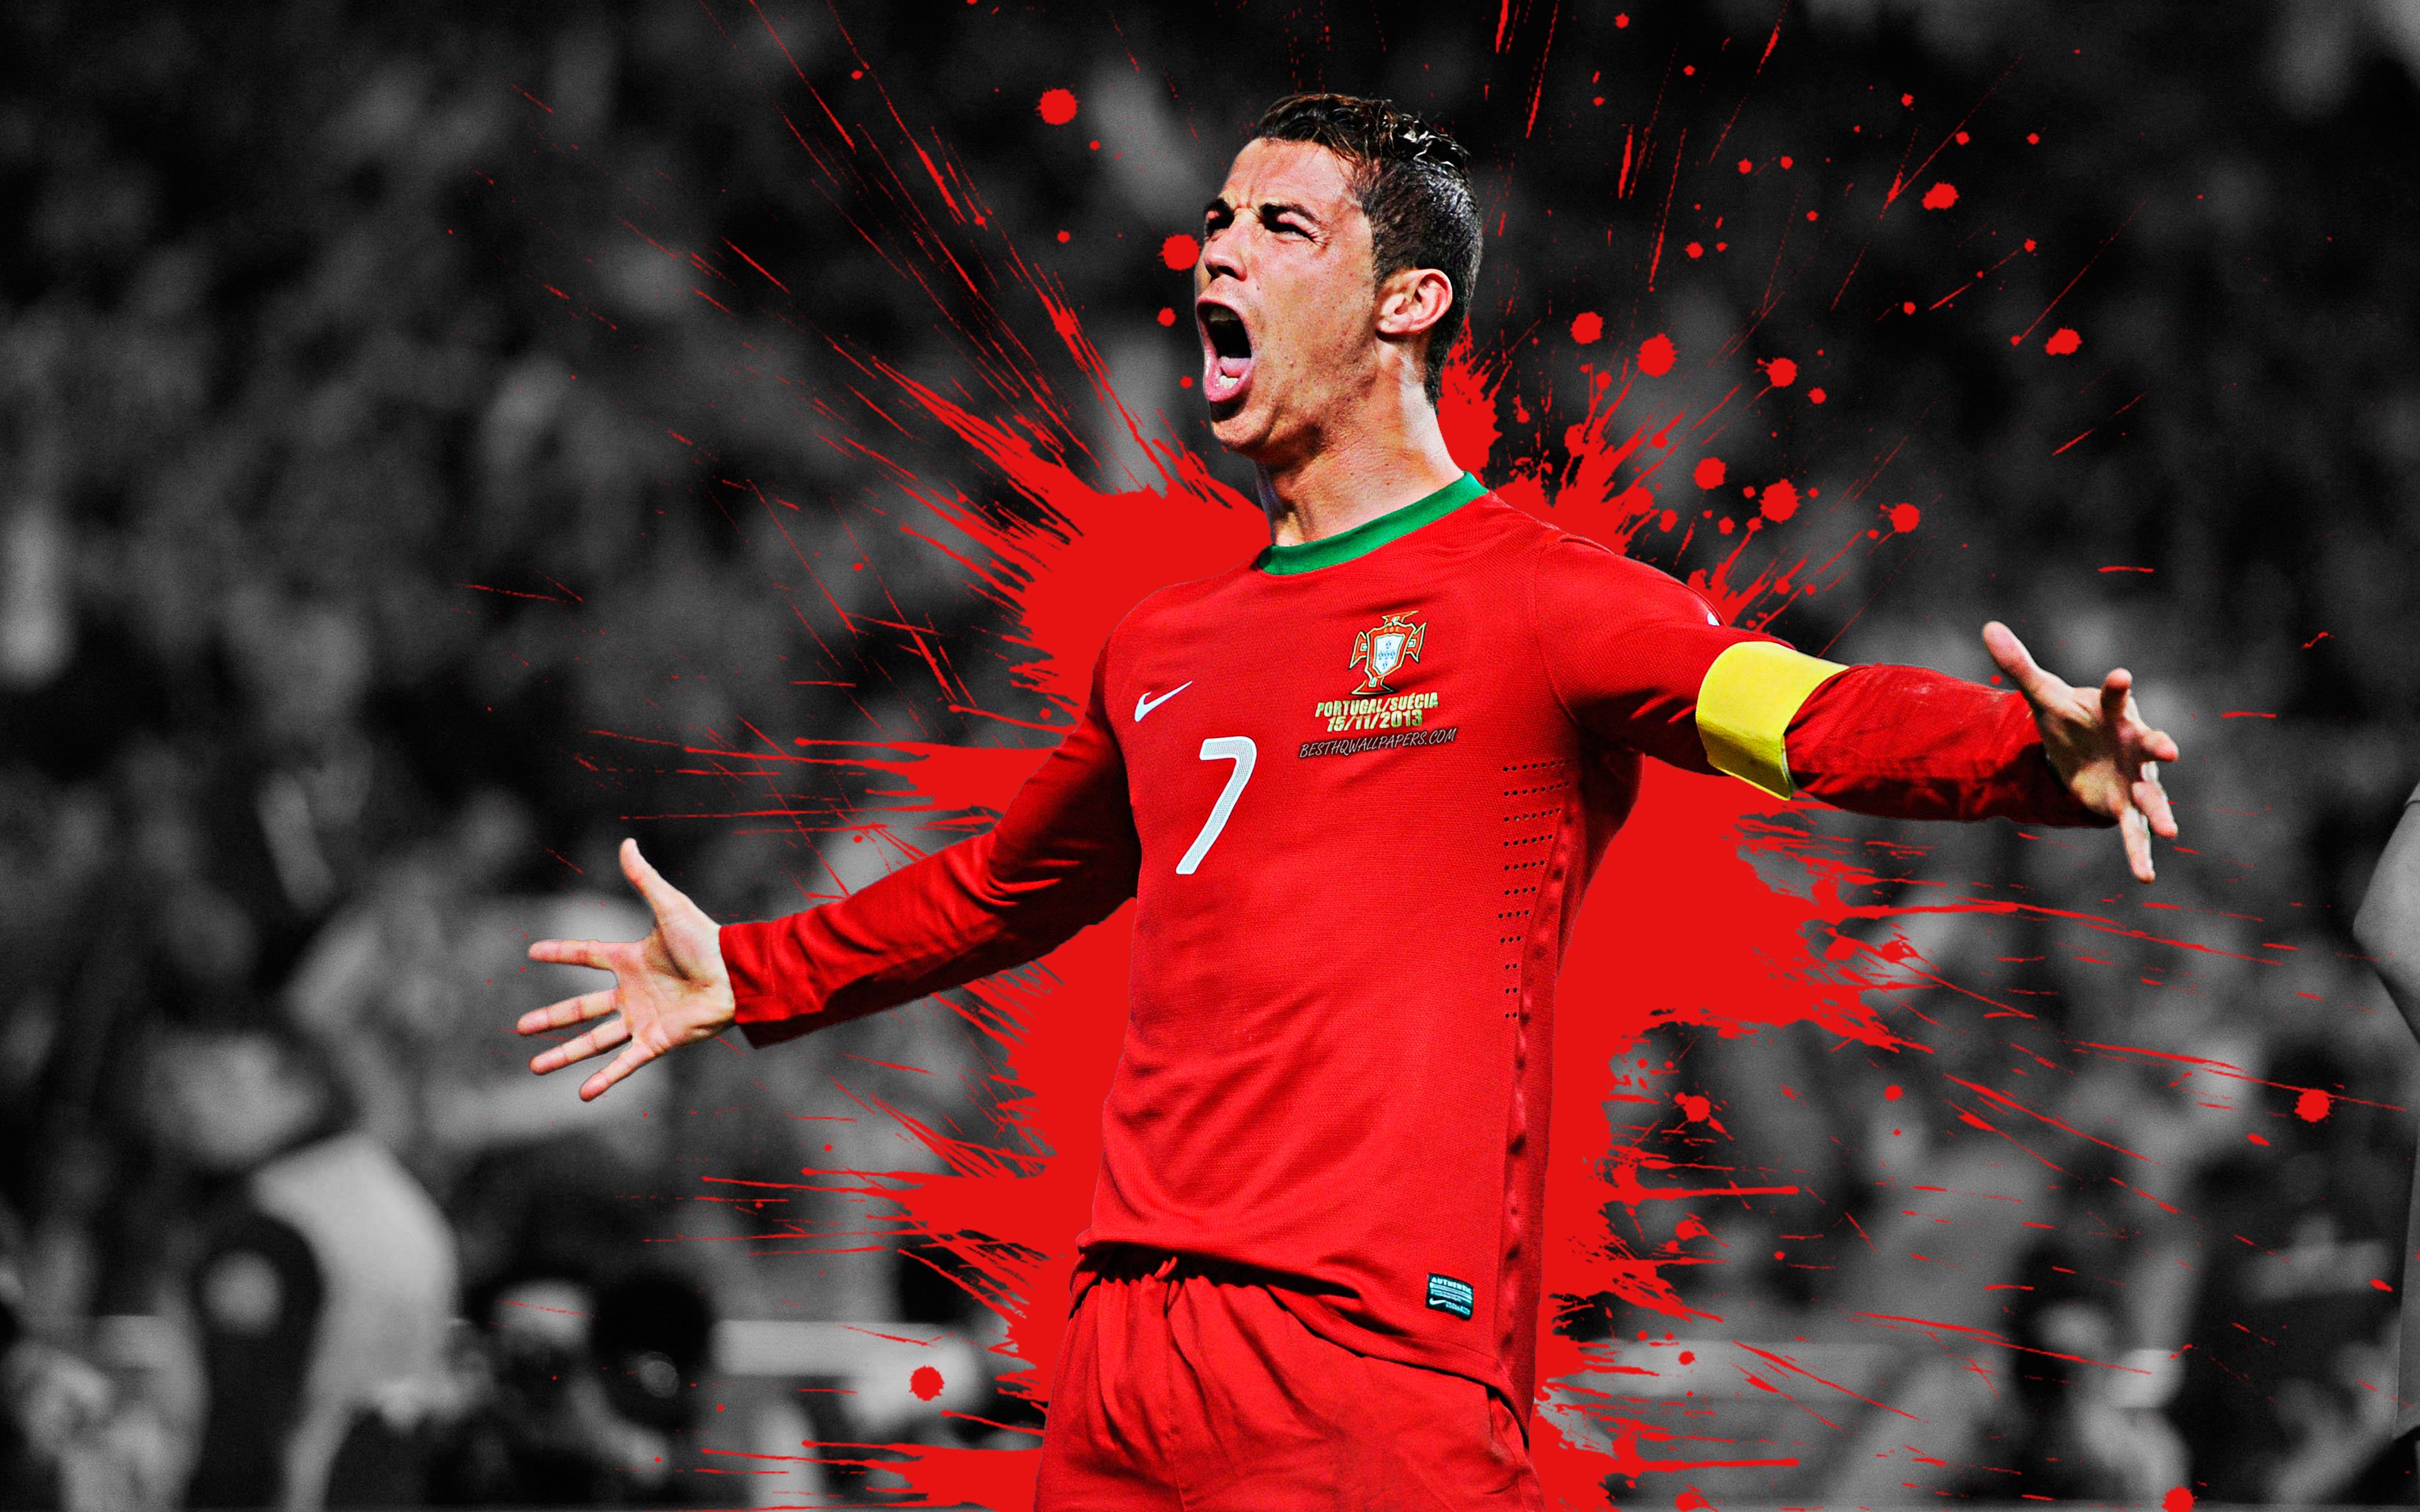 Download wallpaper Cristiano Ronaldo, 4k, Portugal national football team, art, splashes of paint, grunge art, Portuguese footballer, creative art, Portugal, football for desktop with resolution 3840x2400. High Quality HD picture wallpaper